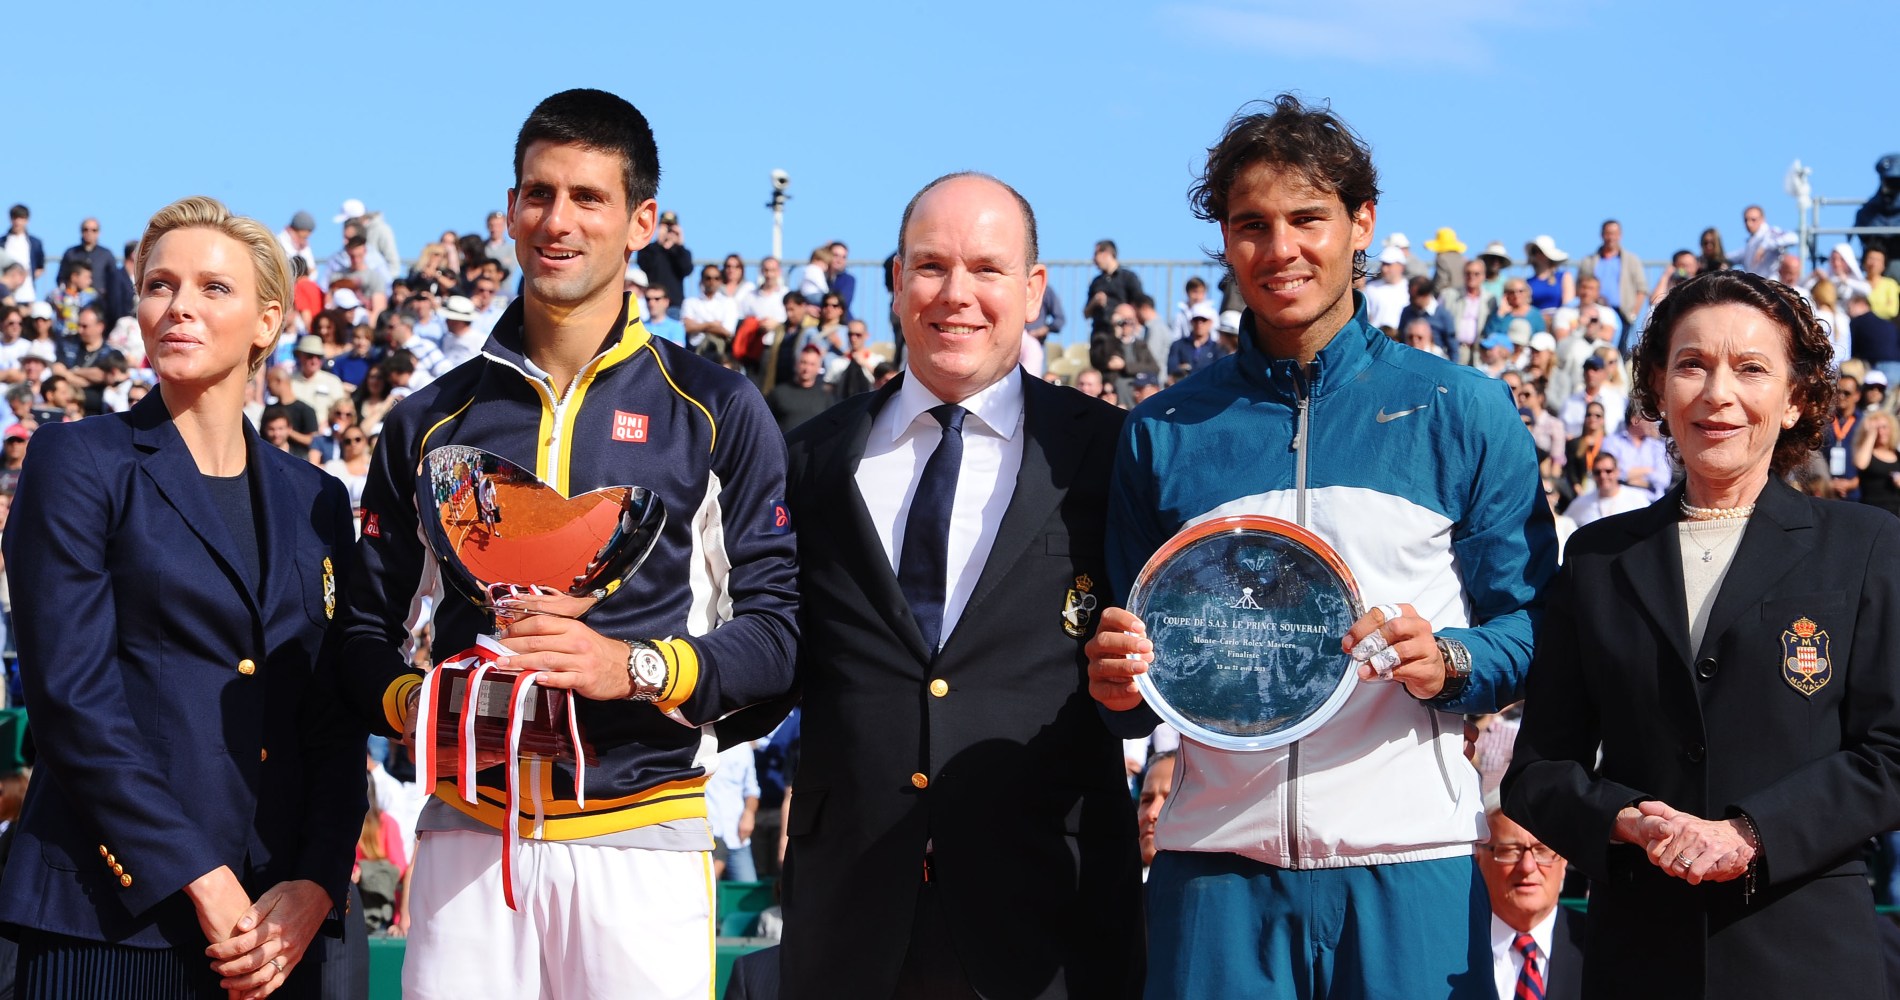 Novak Djokovic and Rafael Nadal pose with their trophies after the 2013 final.